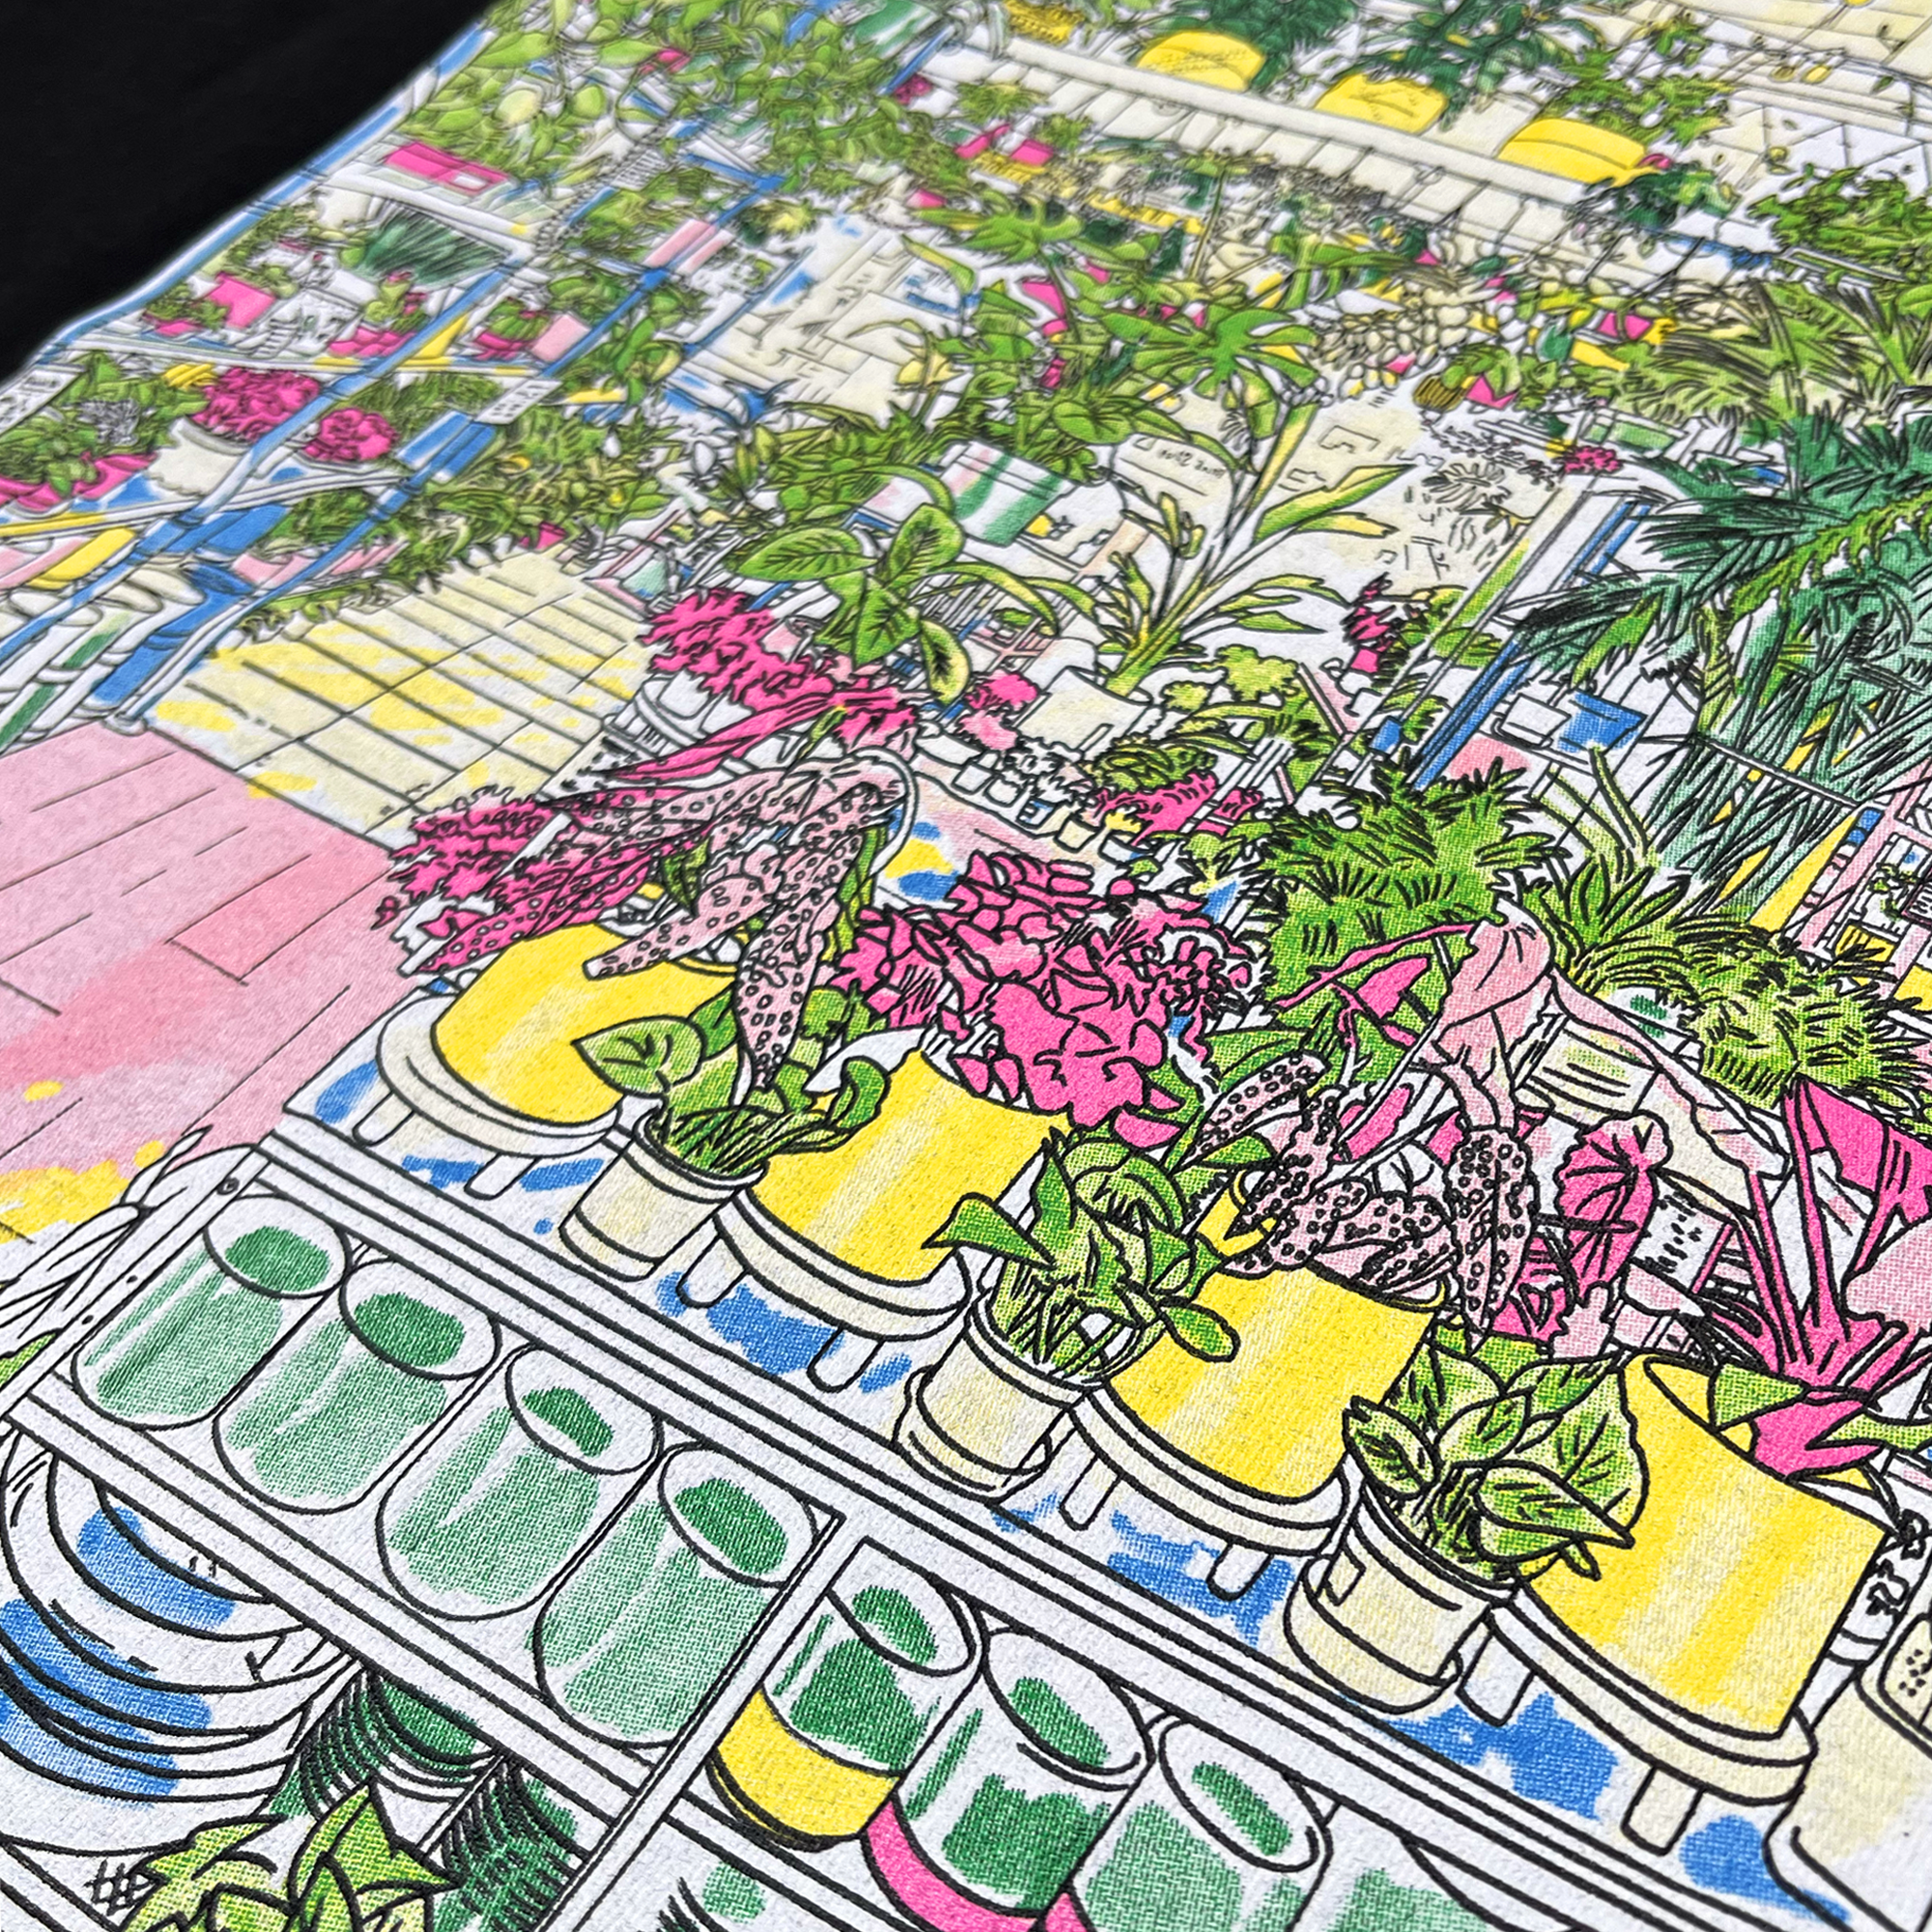 Detailed close-up of large hand-drawn full color graphic of the inside of Planterday, a mission-driven plant shop in Oakland, CA, on a black cotton t-shirt.